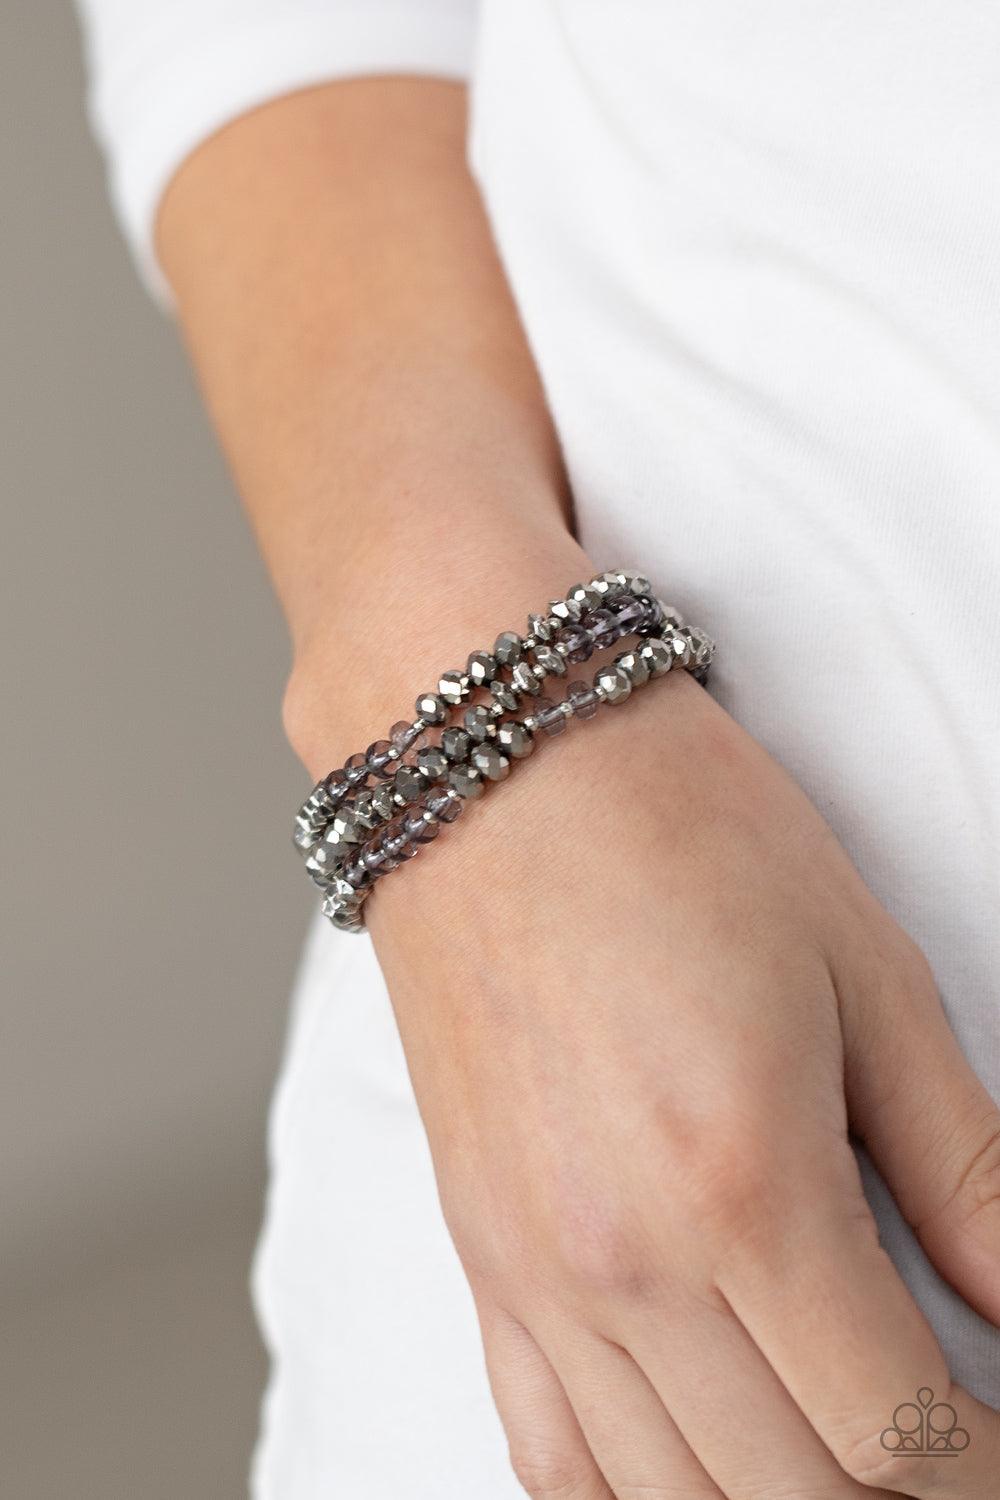 Paparazzi Accessories Stellar Strut - Silver Infused with faceted silver beads, a glamorous collection of sparkly hematite crystals and smoky beads are threaded along stretchy bands around the wrist, creating glittery layers. Sold as one set of three brac